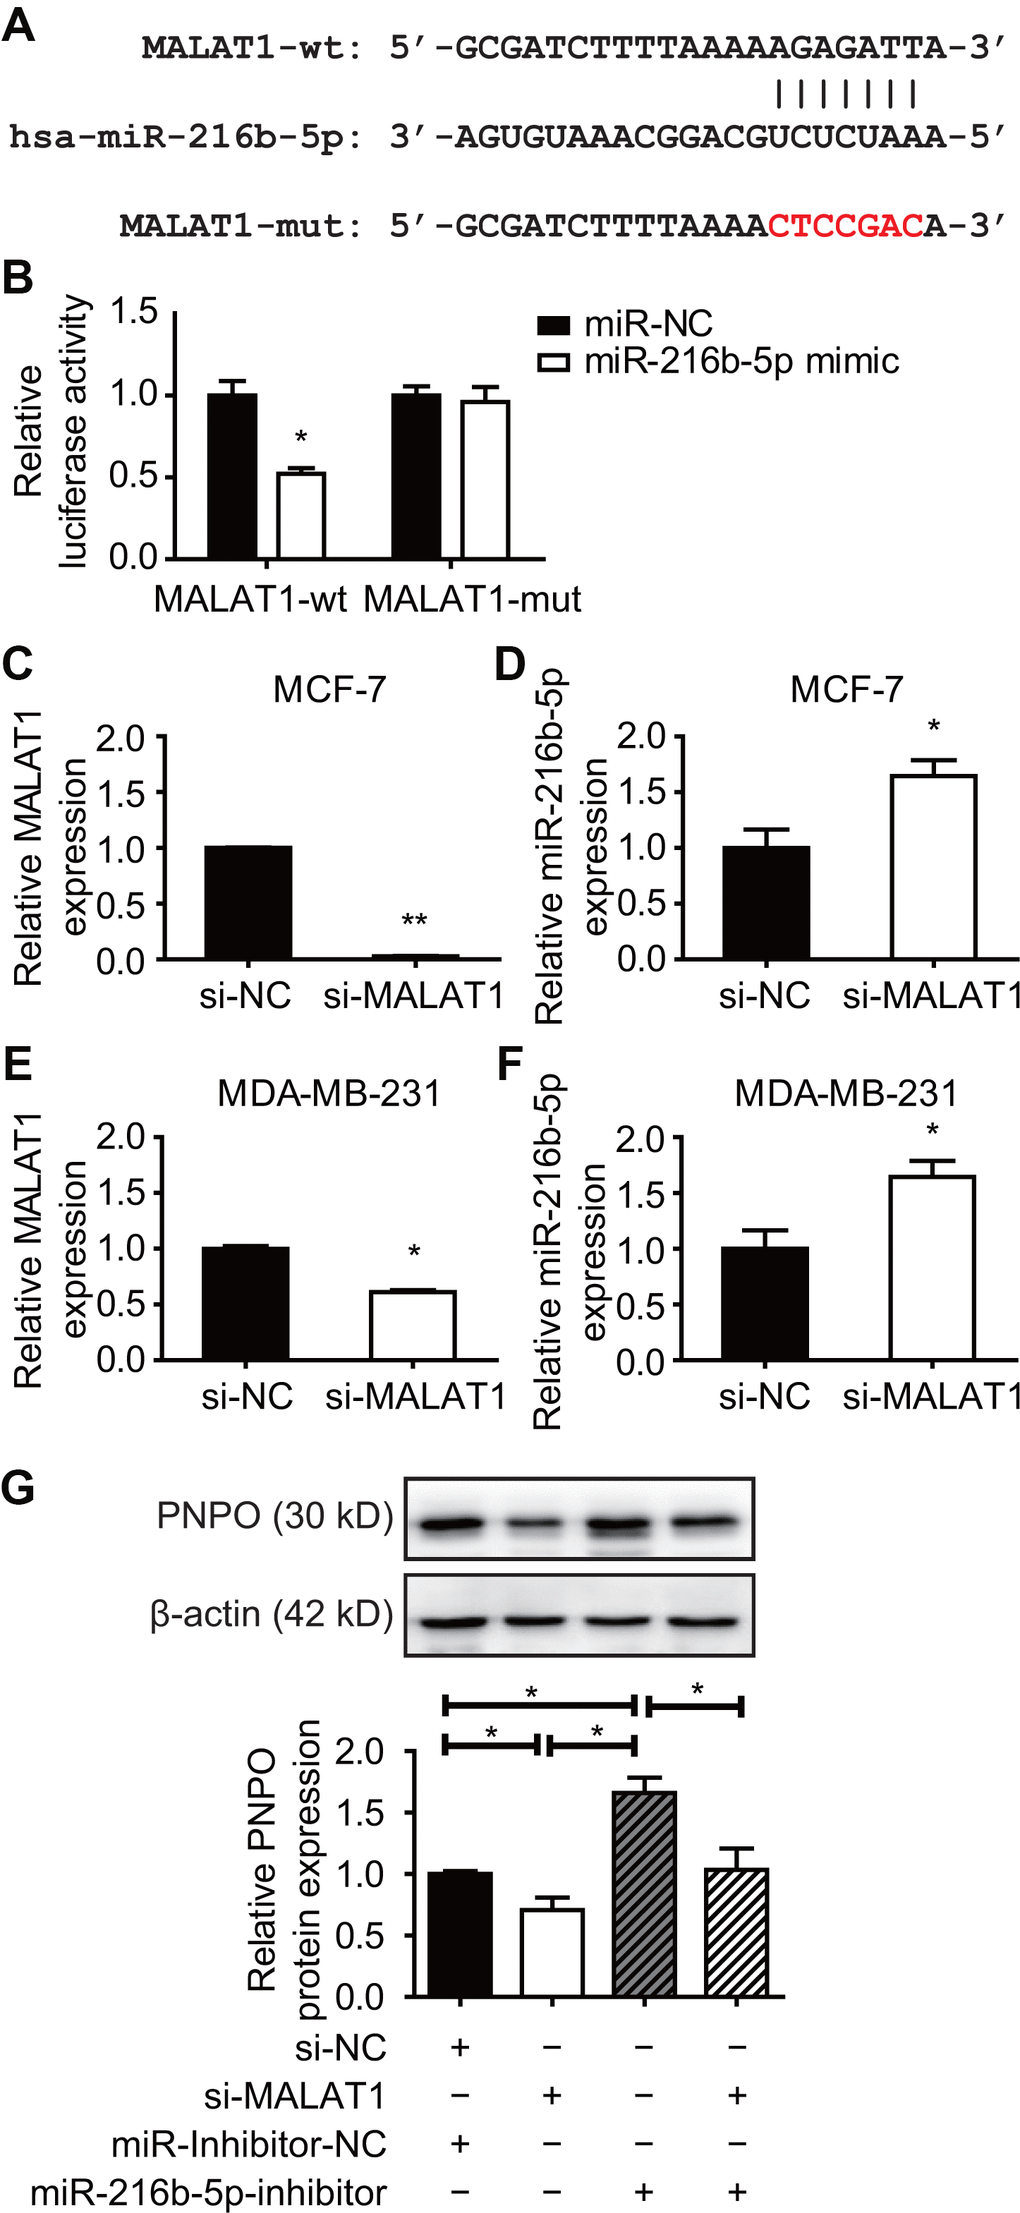 Effect of MALAT1 on PNPO and miR-216b-5p expression in breast cancer cells. (A) Identification of the sequence of binding sites between MALAT1 and miR-216b-5p. MALAT1-wt, wild-type MALAT1; MALAT1-mut, mutated MALAT1. (B) Detection of luciferase activity by the dual-luciferase reporter assay in HEK-293T cells. (C) Detection of MALAT1 expression by qRT-PCR in MCF-7 cells after si-MALAT1 treatment. (D) Detection of miR-216b-5p expression by qRT-PCR in MCF-7 cells after si-MALAT1 treatment. (E) Detection of MALAT1 expression by qRT-PCR in MDA-MB-231 cells after si-MALAT1 treatment. (F) Detection of miR-216b-5p expression by qRT-PCR in MDA-MB-231 cells after si-MALAT1 treatment. (G) Effect of miR-216b-5p on MALAT1-mediated PNPO expression. HEK-293T cells were treated with si-NC plus miR-inhibitor-NC, si-MALAT1 along, miR-216b-5p along, or si-MALAT1 plus miR-216b-5p for 48 h. The expression of PNPO protein was detected by Western blot (upper panel) and semi-quantification (lower panel). miR-NC, negative control of miRNA; miR-inhibitor-NC, negative control of miR-inhibitor; si-NC, negative control of siRNA; si-MALAT1, MALAT1-siRNA. n = 3; * P 